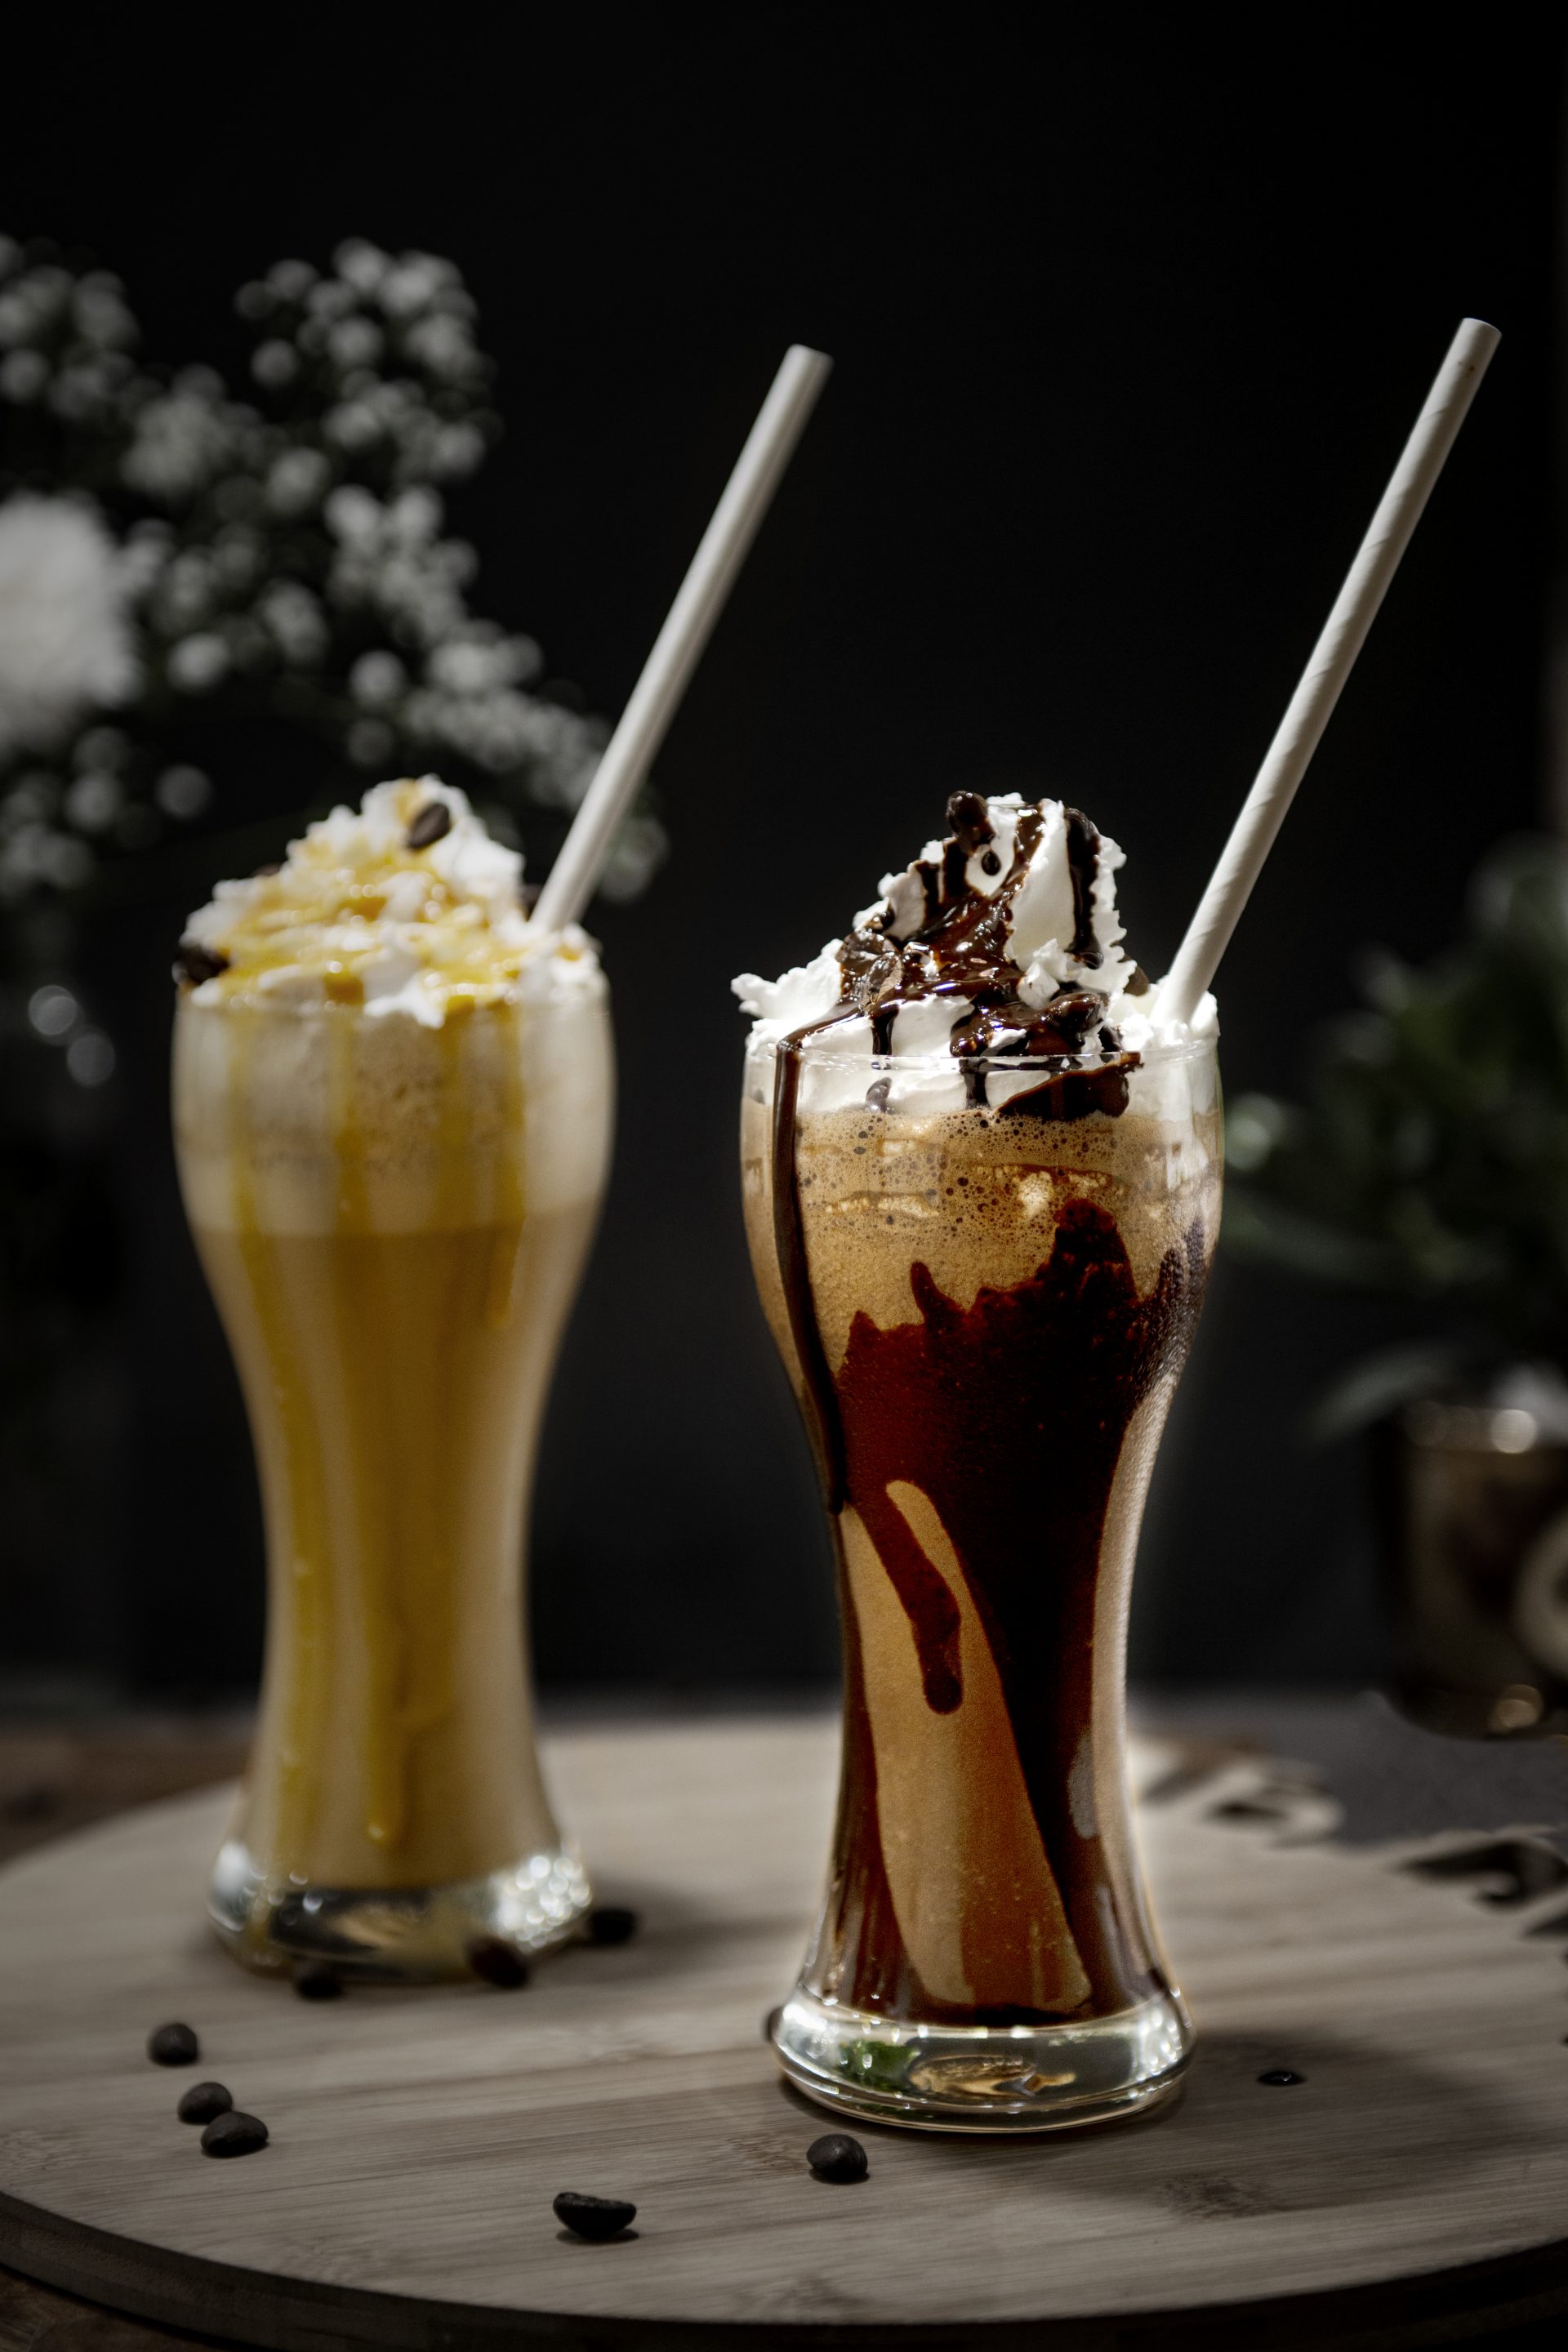 Choco frappe scaled